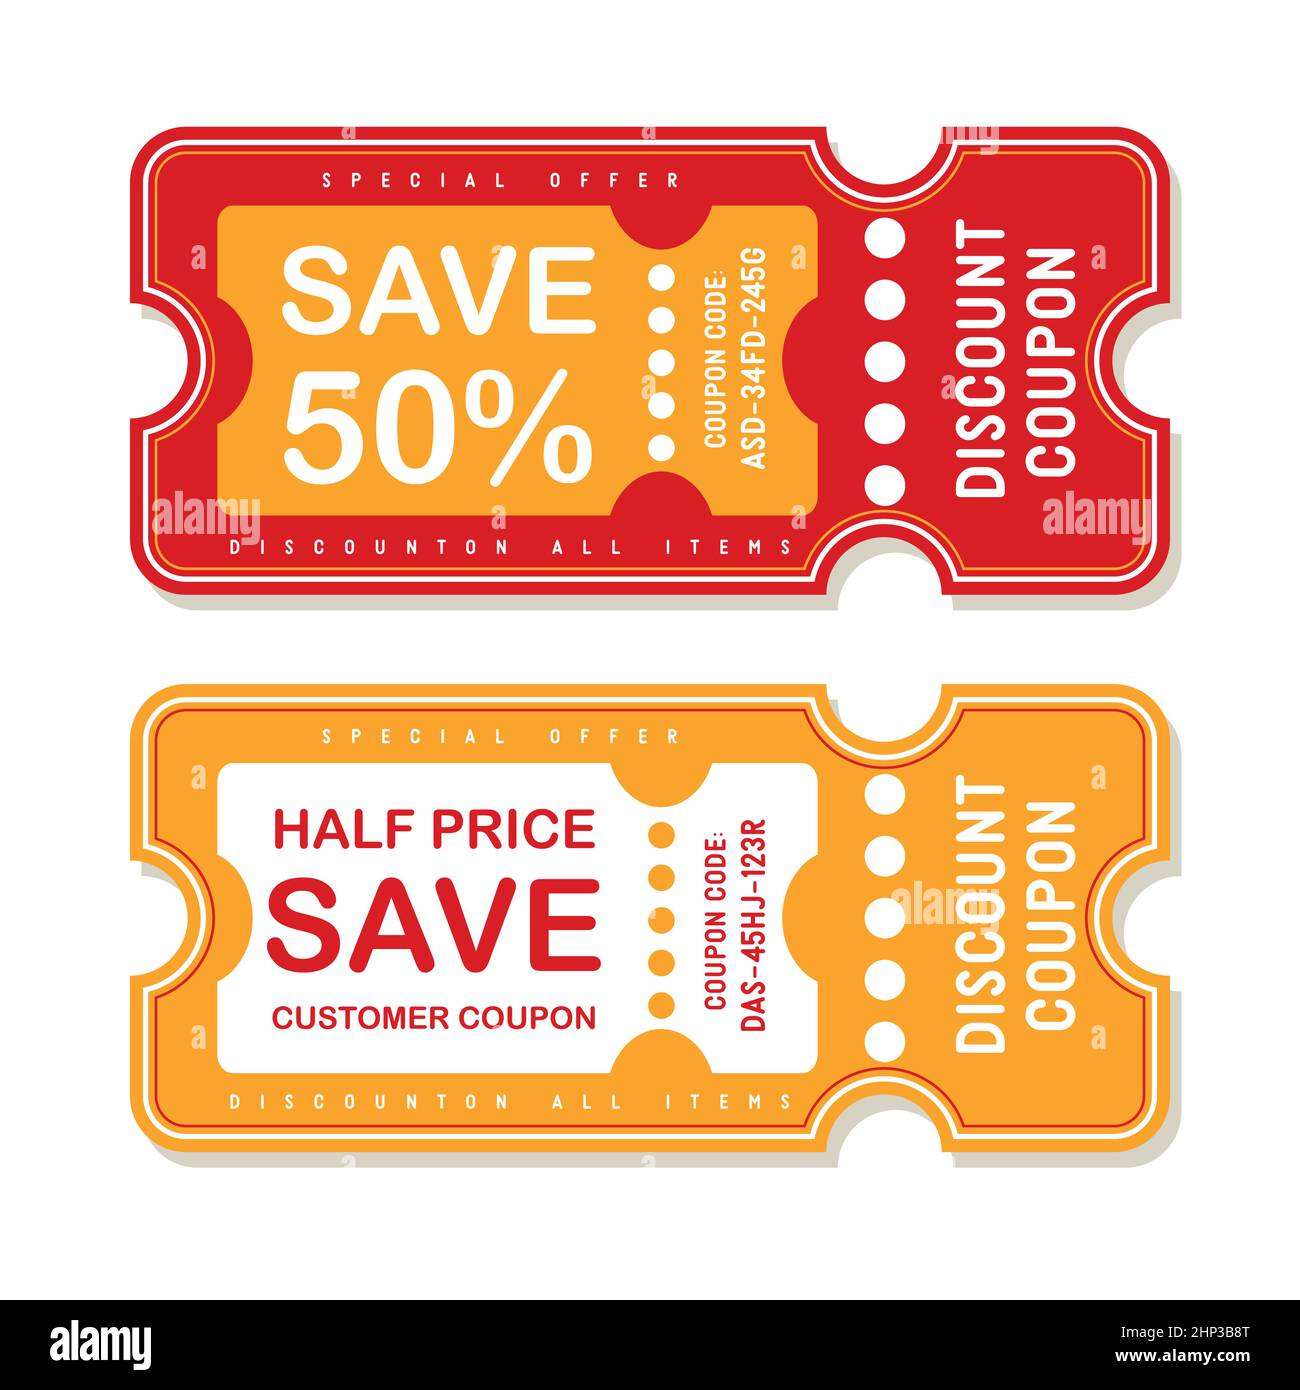 Discount coupon. Half price offer, promo code gift voucher and coupons template. Stock Vector